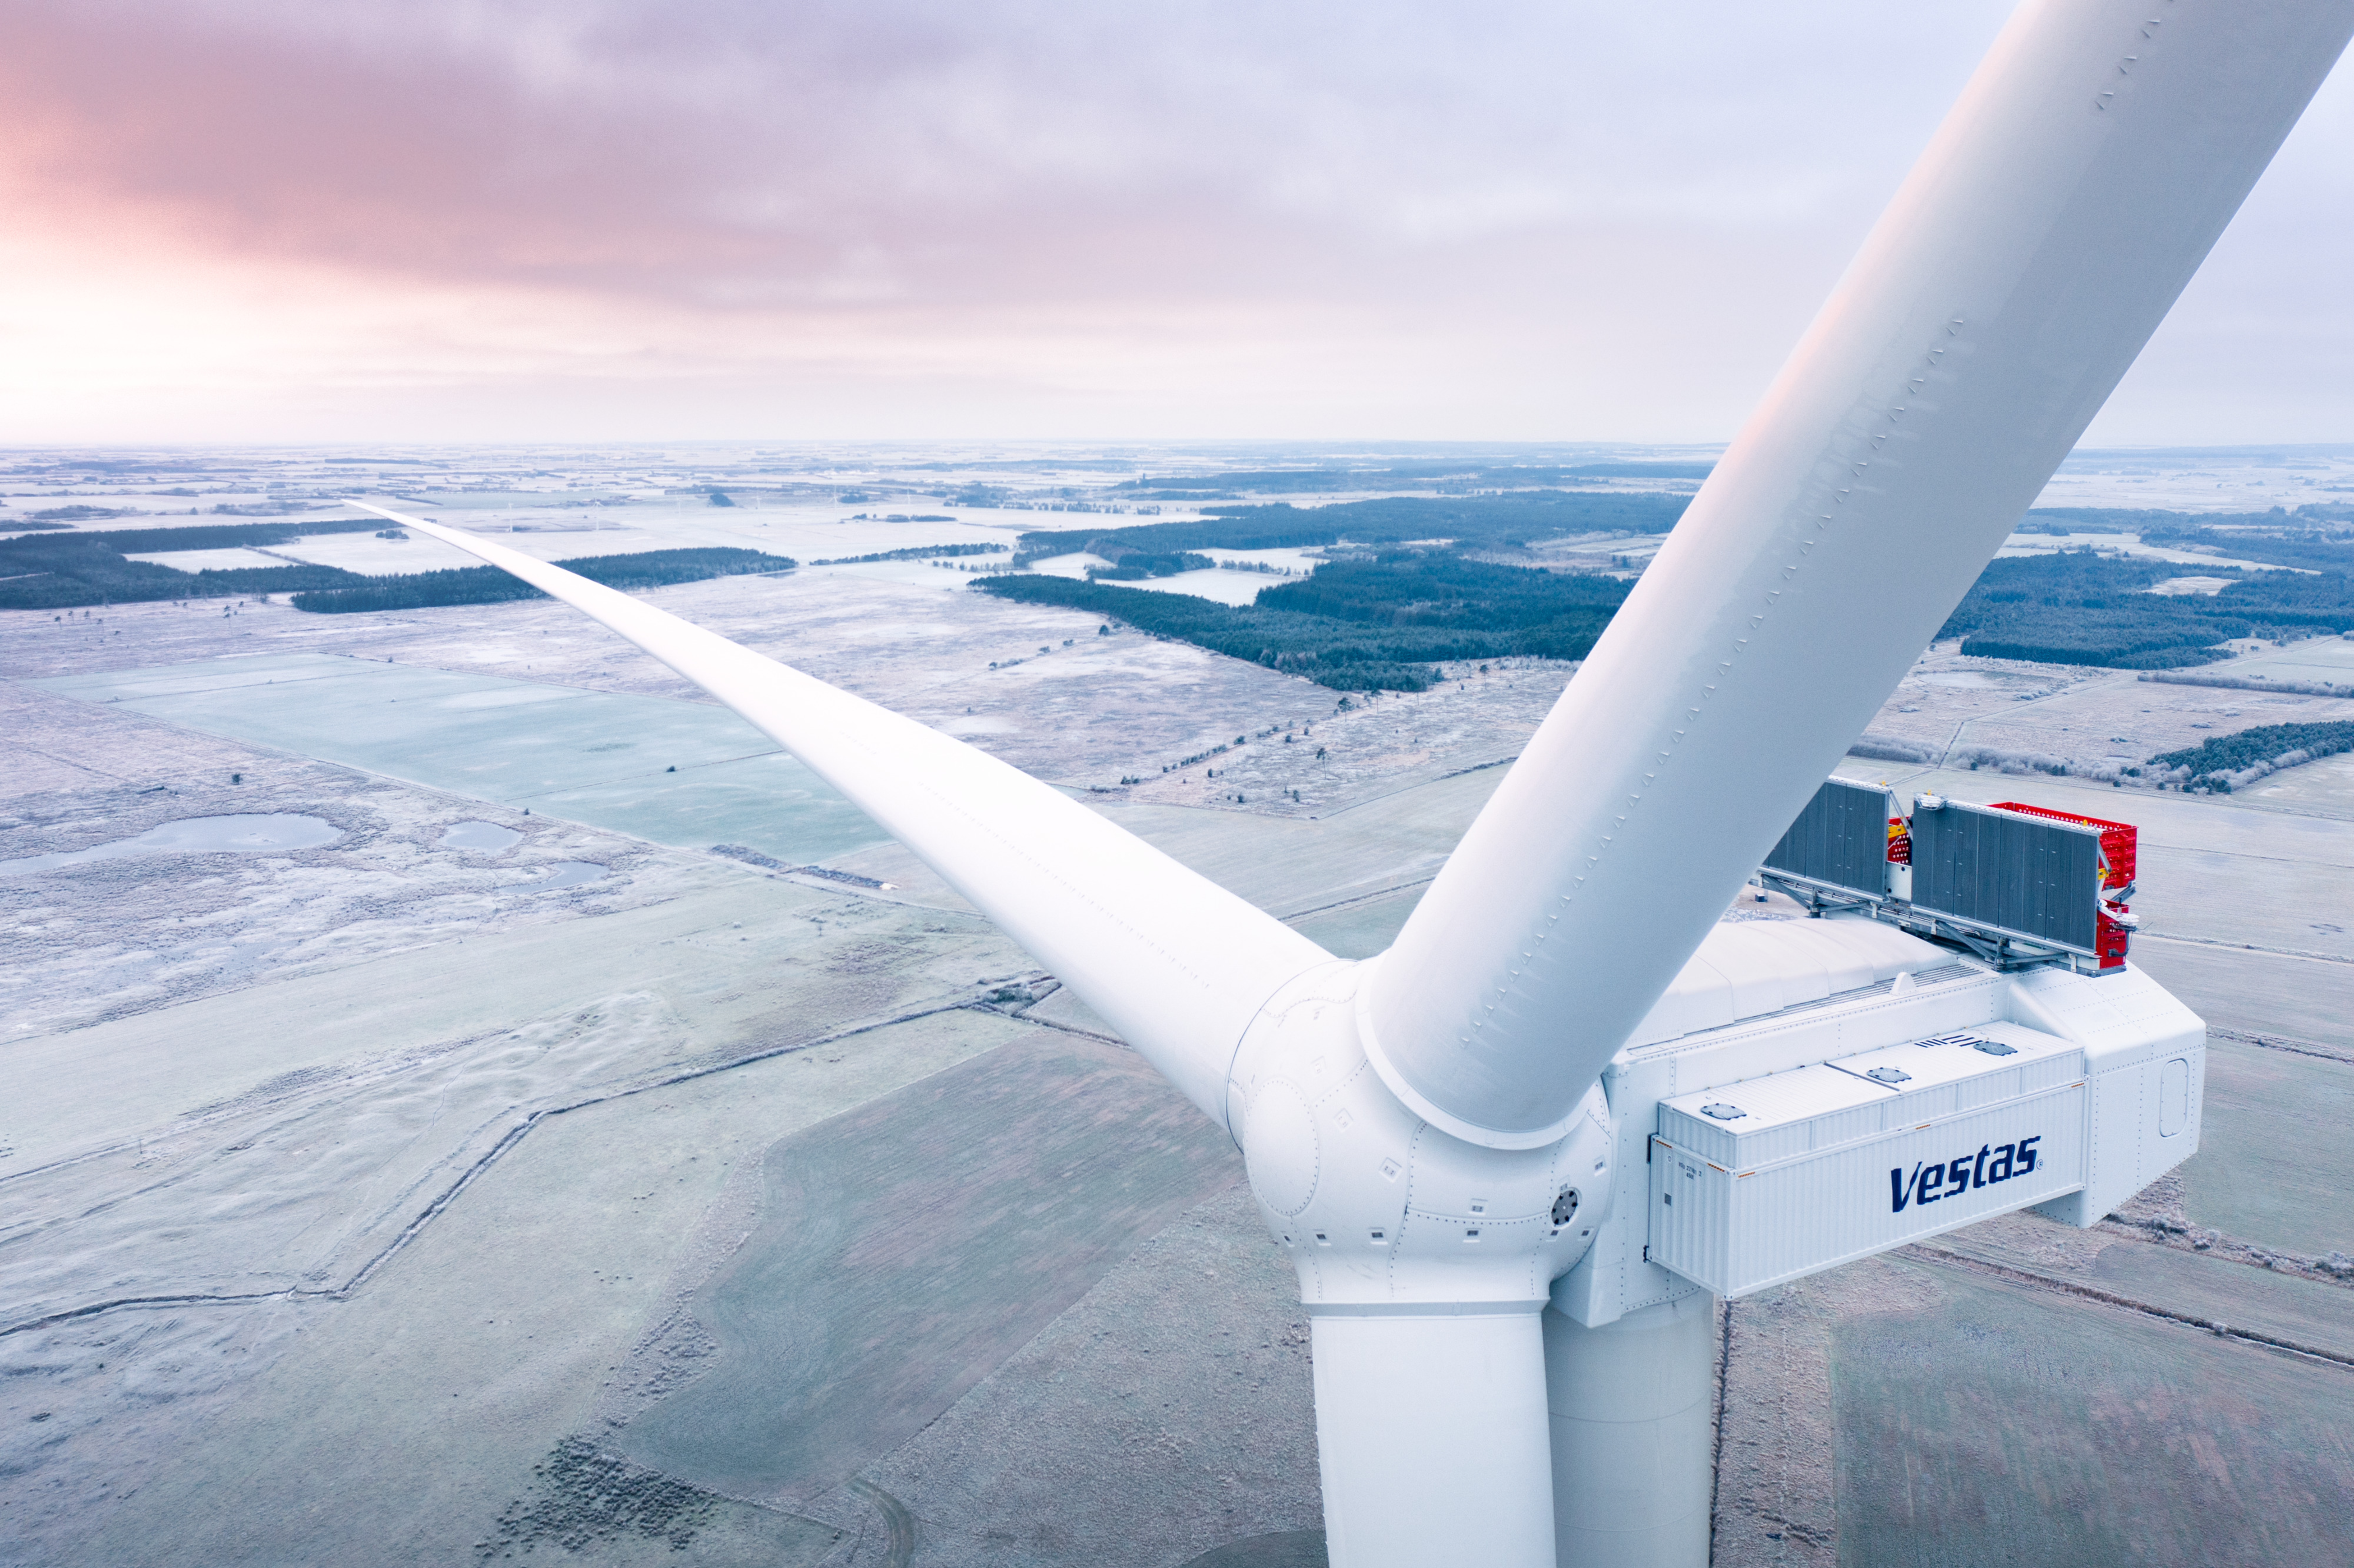 Vestas has wings again, and Danes are still quite good at speaking English